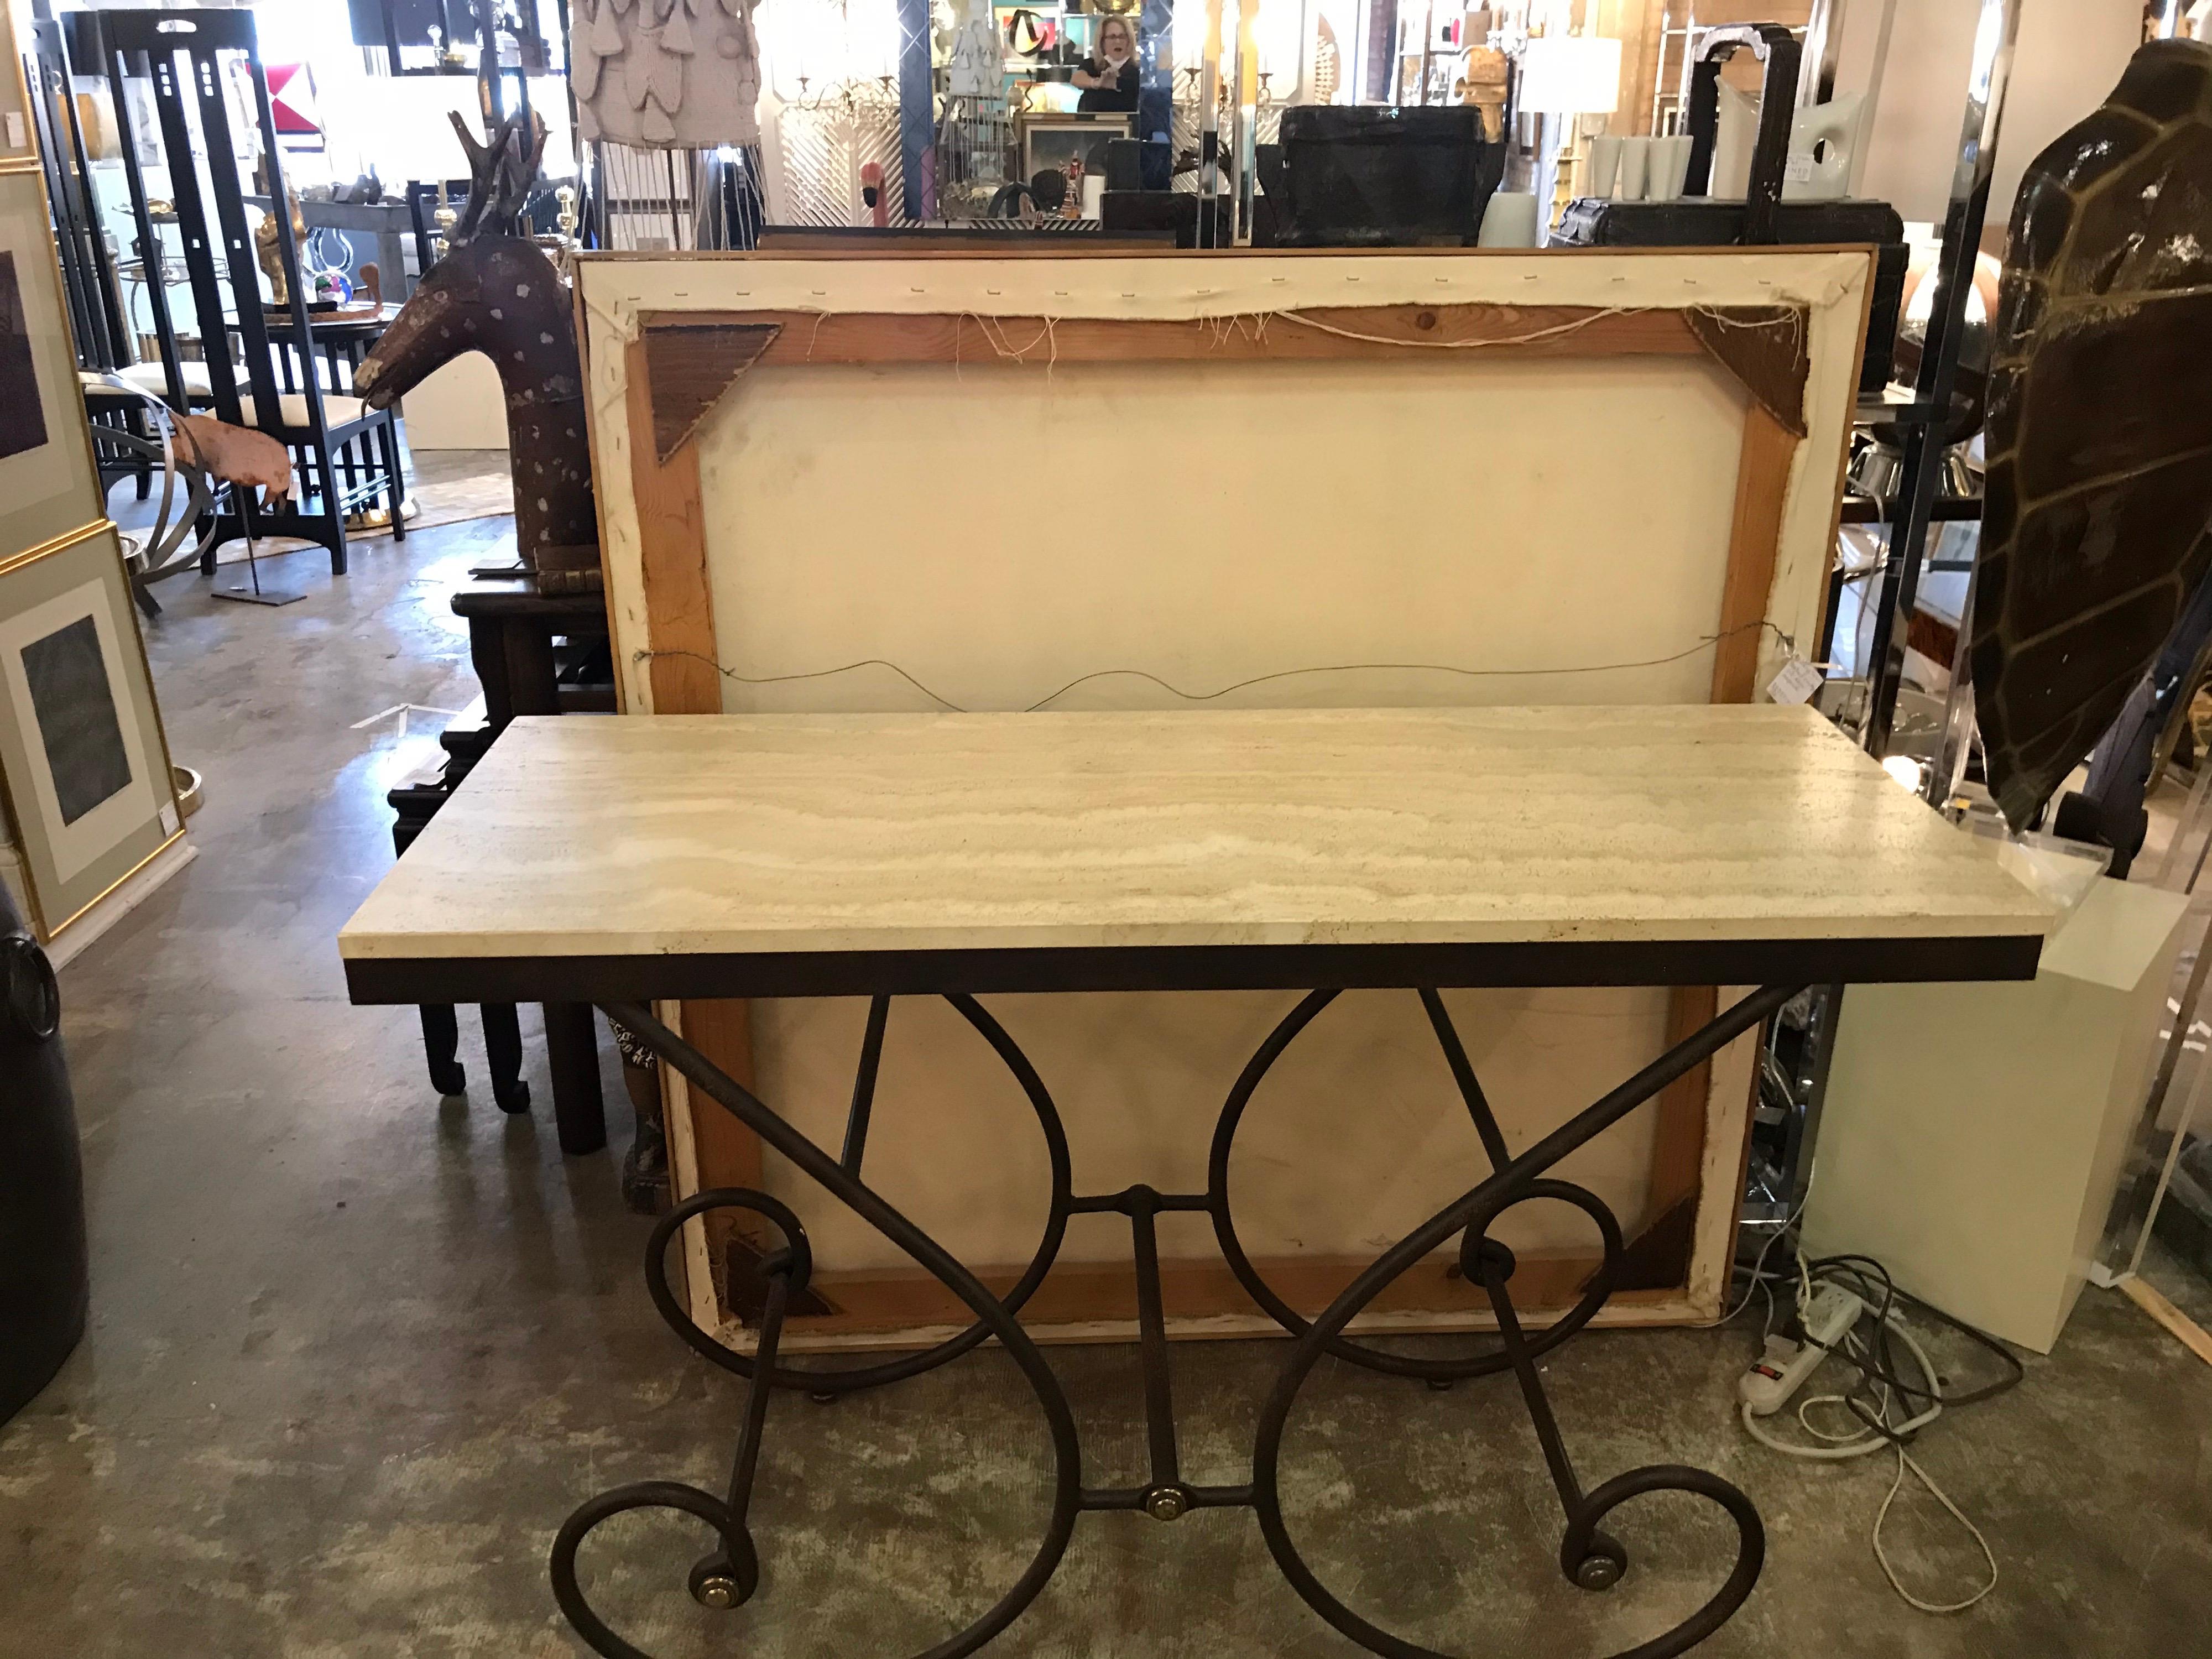 This is a lovely heavy iron with brass caps scroll table with travertine stone thick top. Made in Italy probably, circa 1980.
  